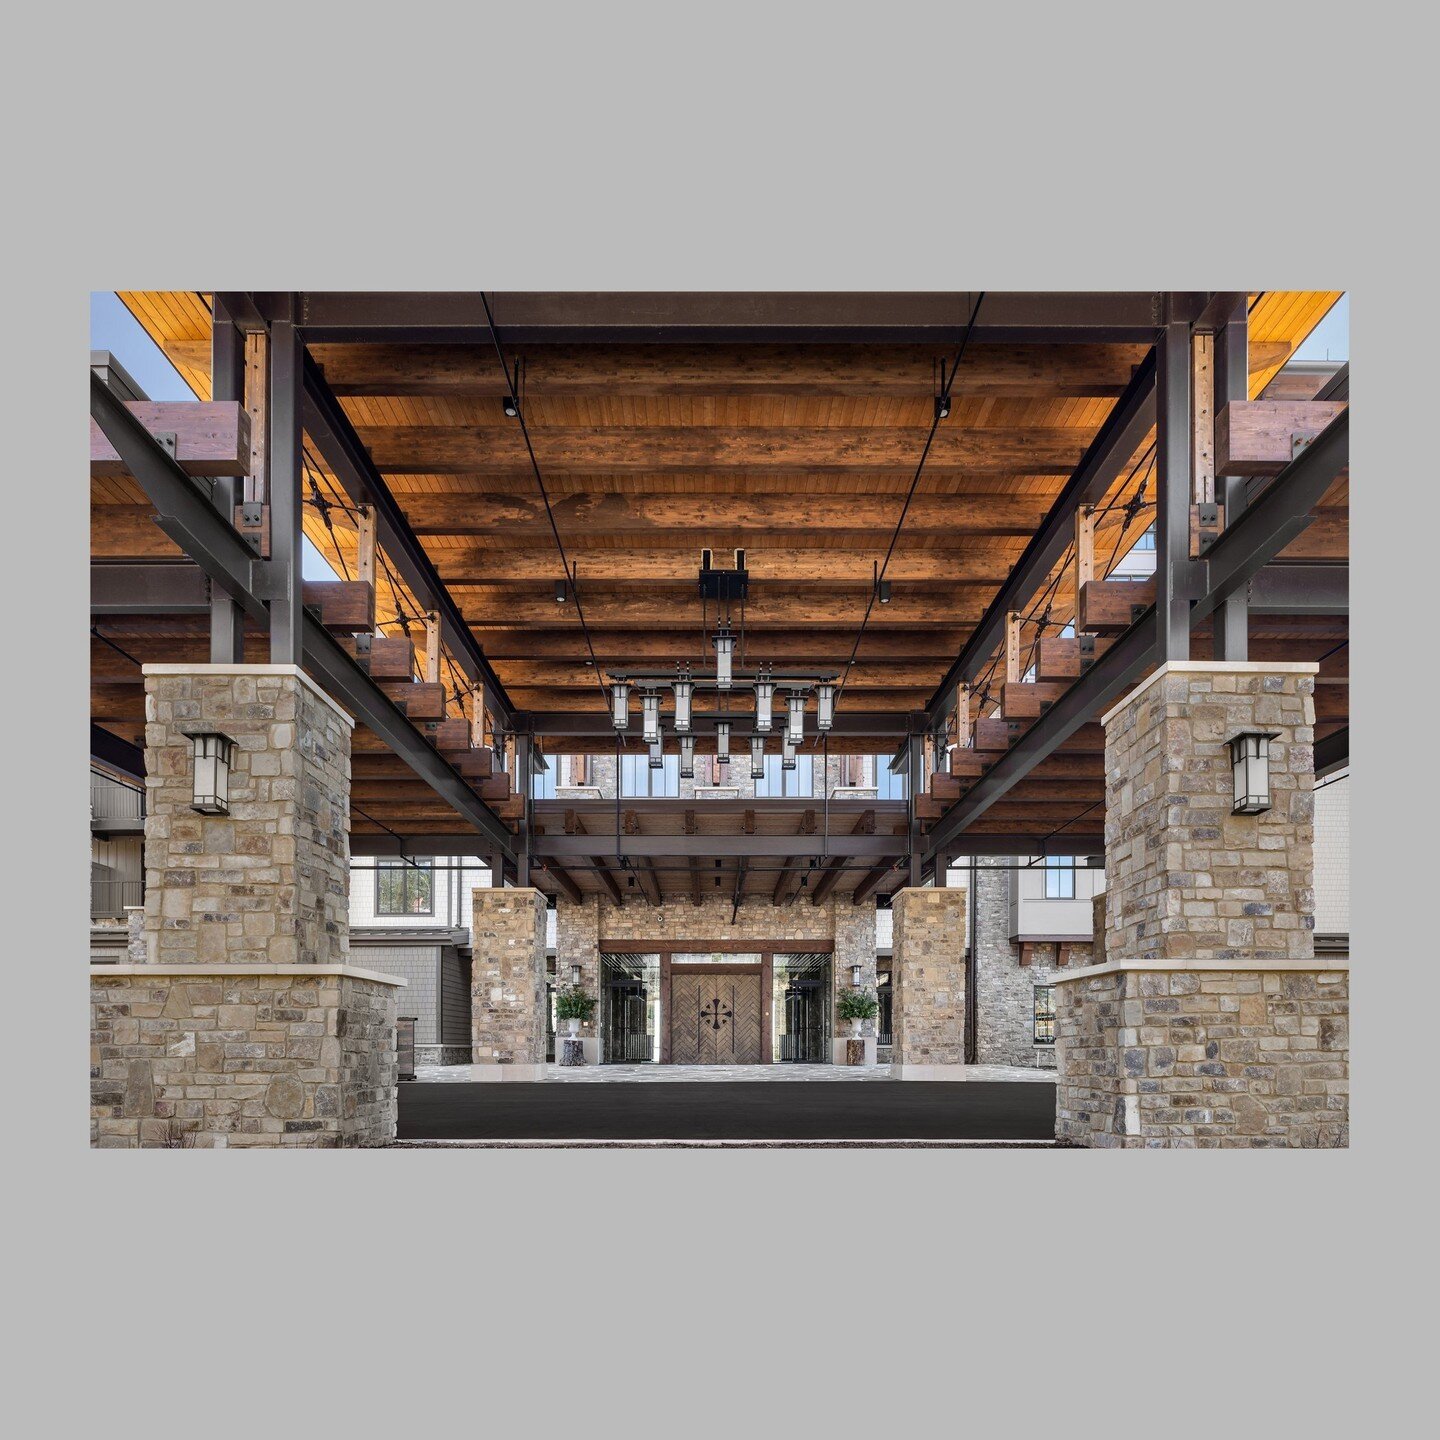 We are incredibly proud of Cloudland's arrival experience. The Porte Cochere is designed with tapered steel,  Douglas Fir Glulam beams, and custom trusses. Locally sourced stone and signature castle style doors draw on the inspiration of McLemore Cov